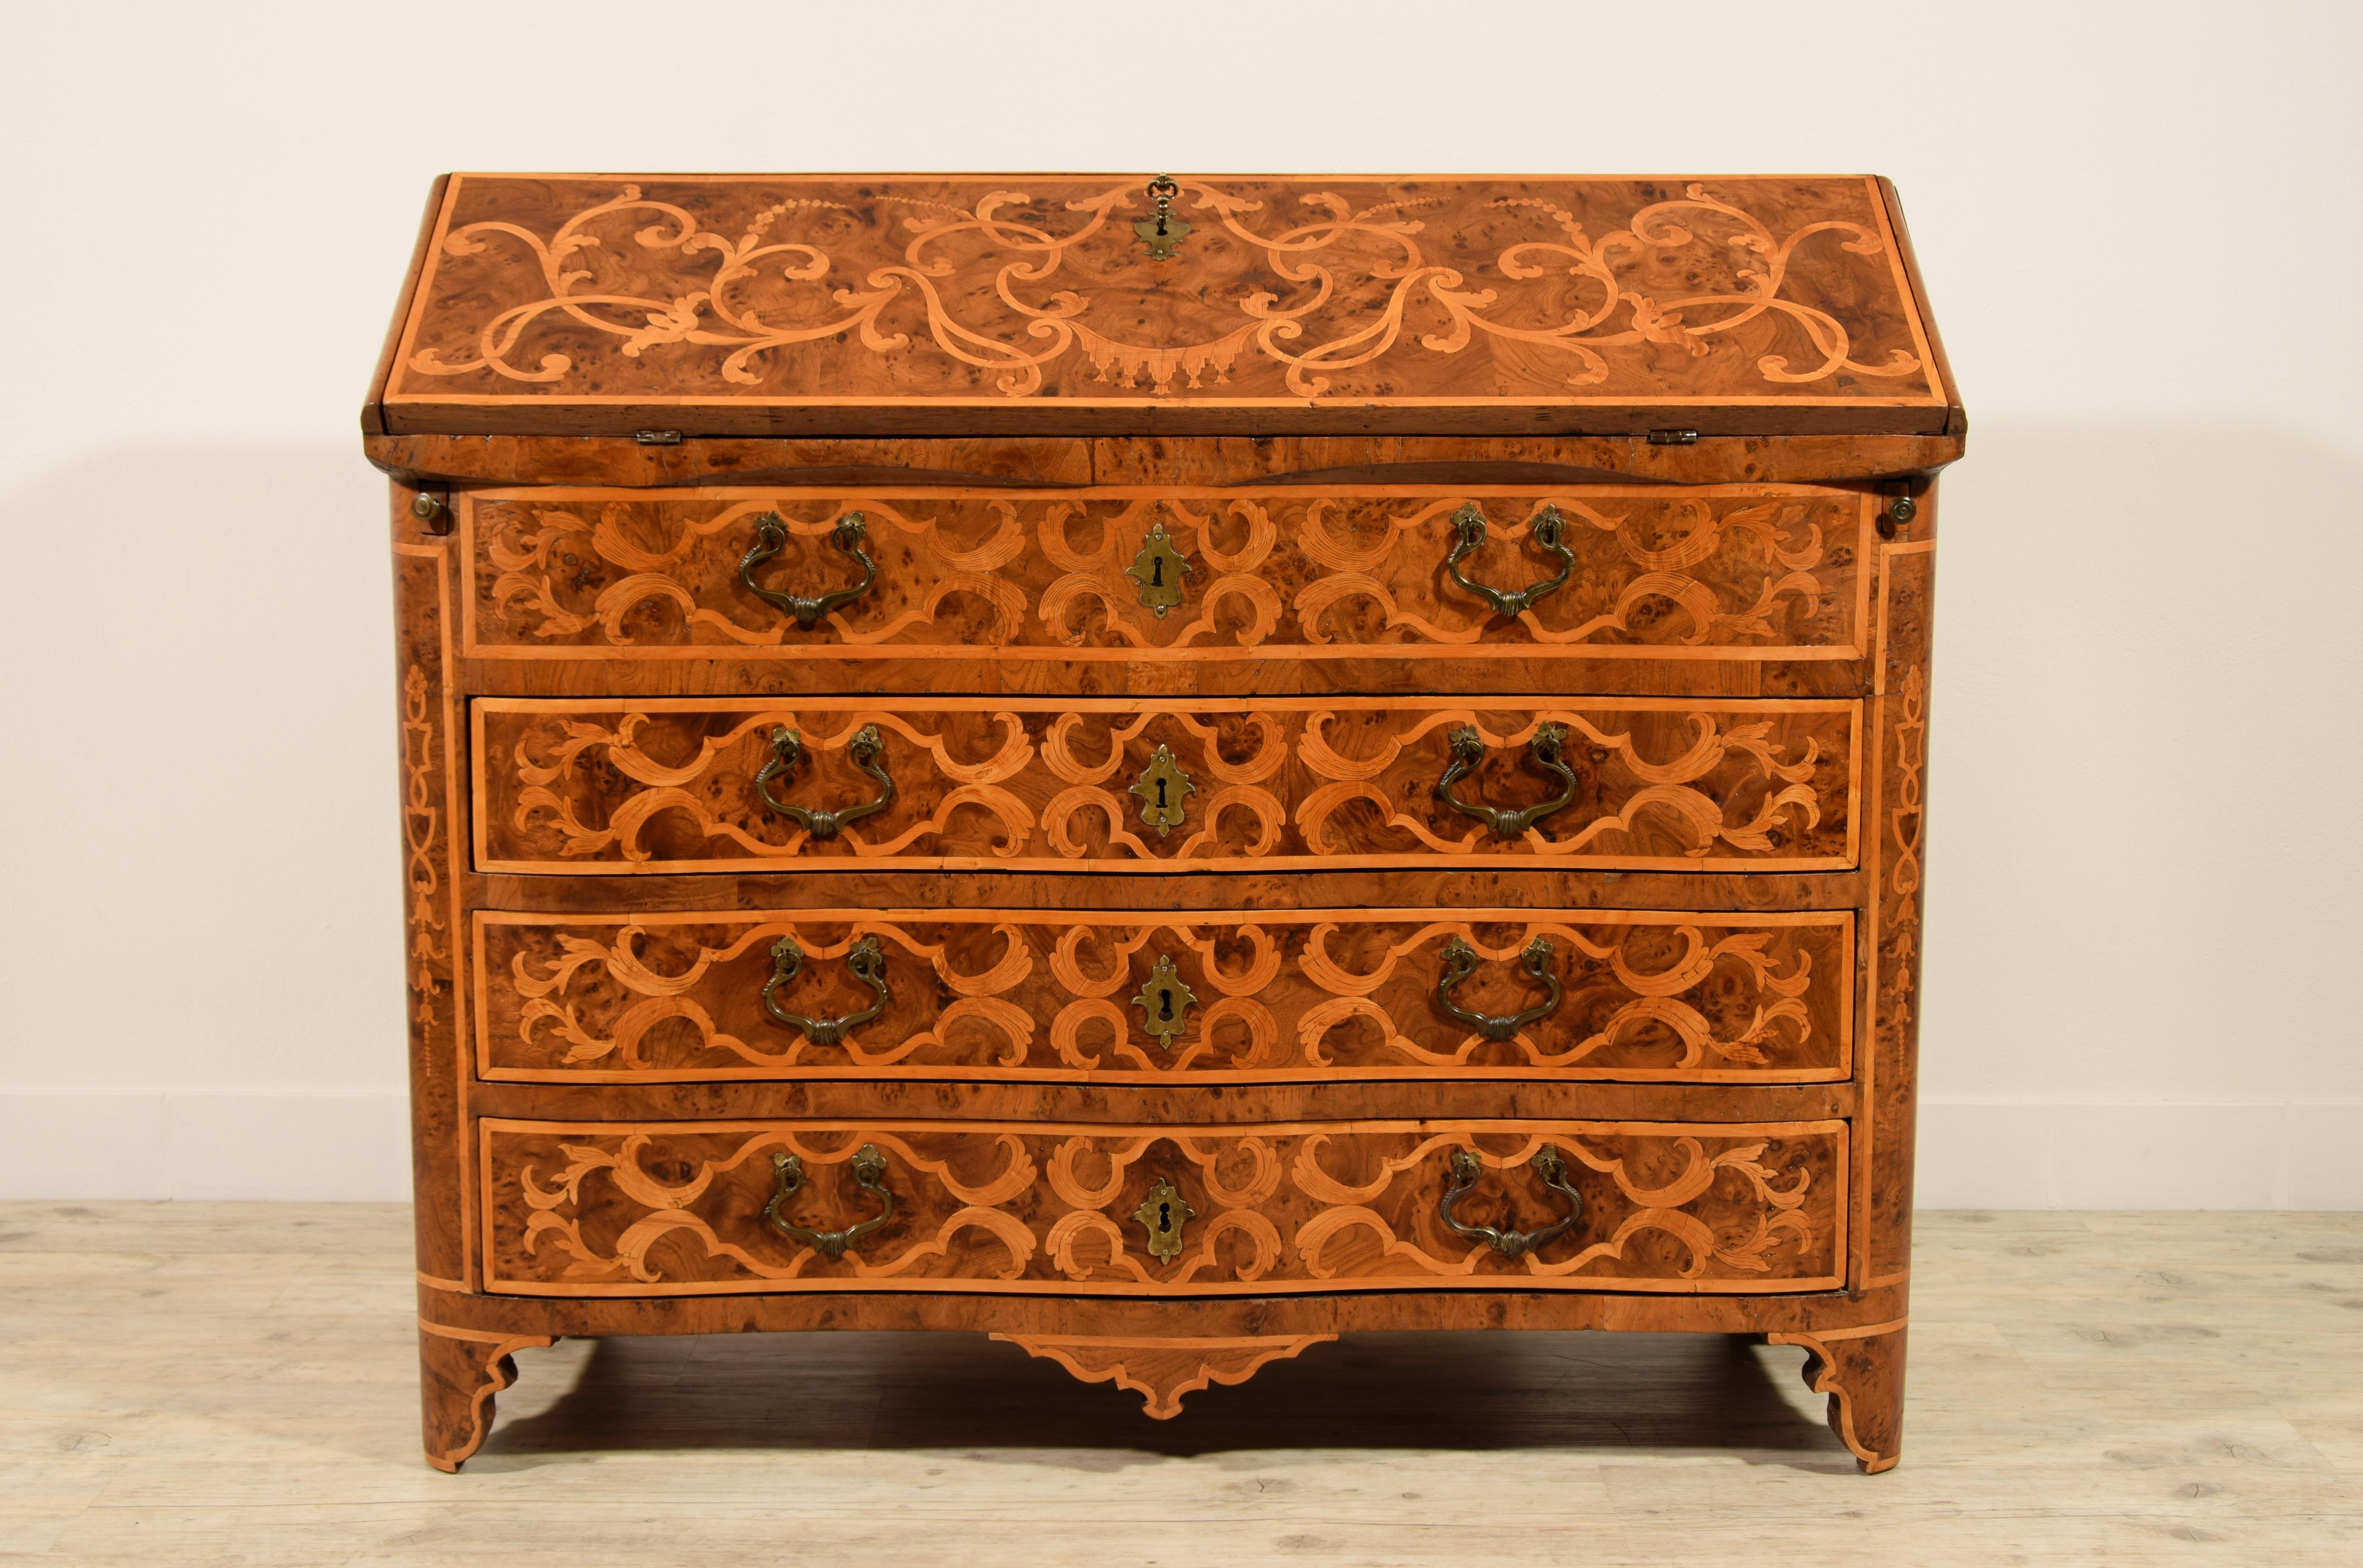 18th century, Italian inlaid wood chest of drawers with secretaire 

This chest of drawers with secretaire represents the elegant production of Piedmontese (Turin – north of Italy) cabinet-making during the early eighteenth century. The rood paved